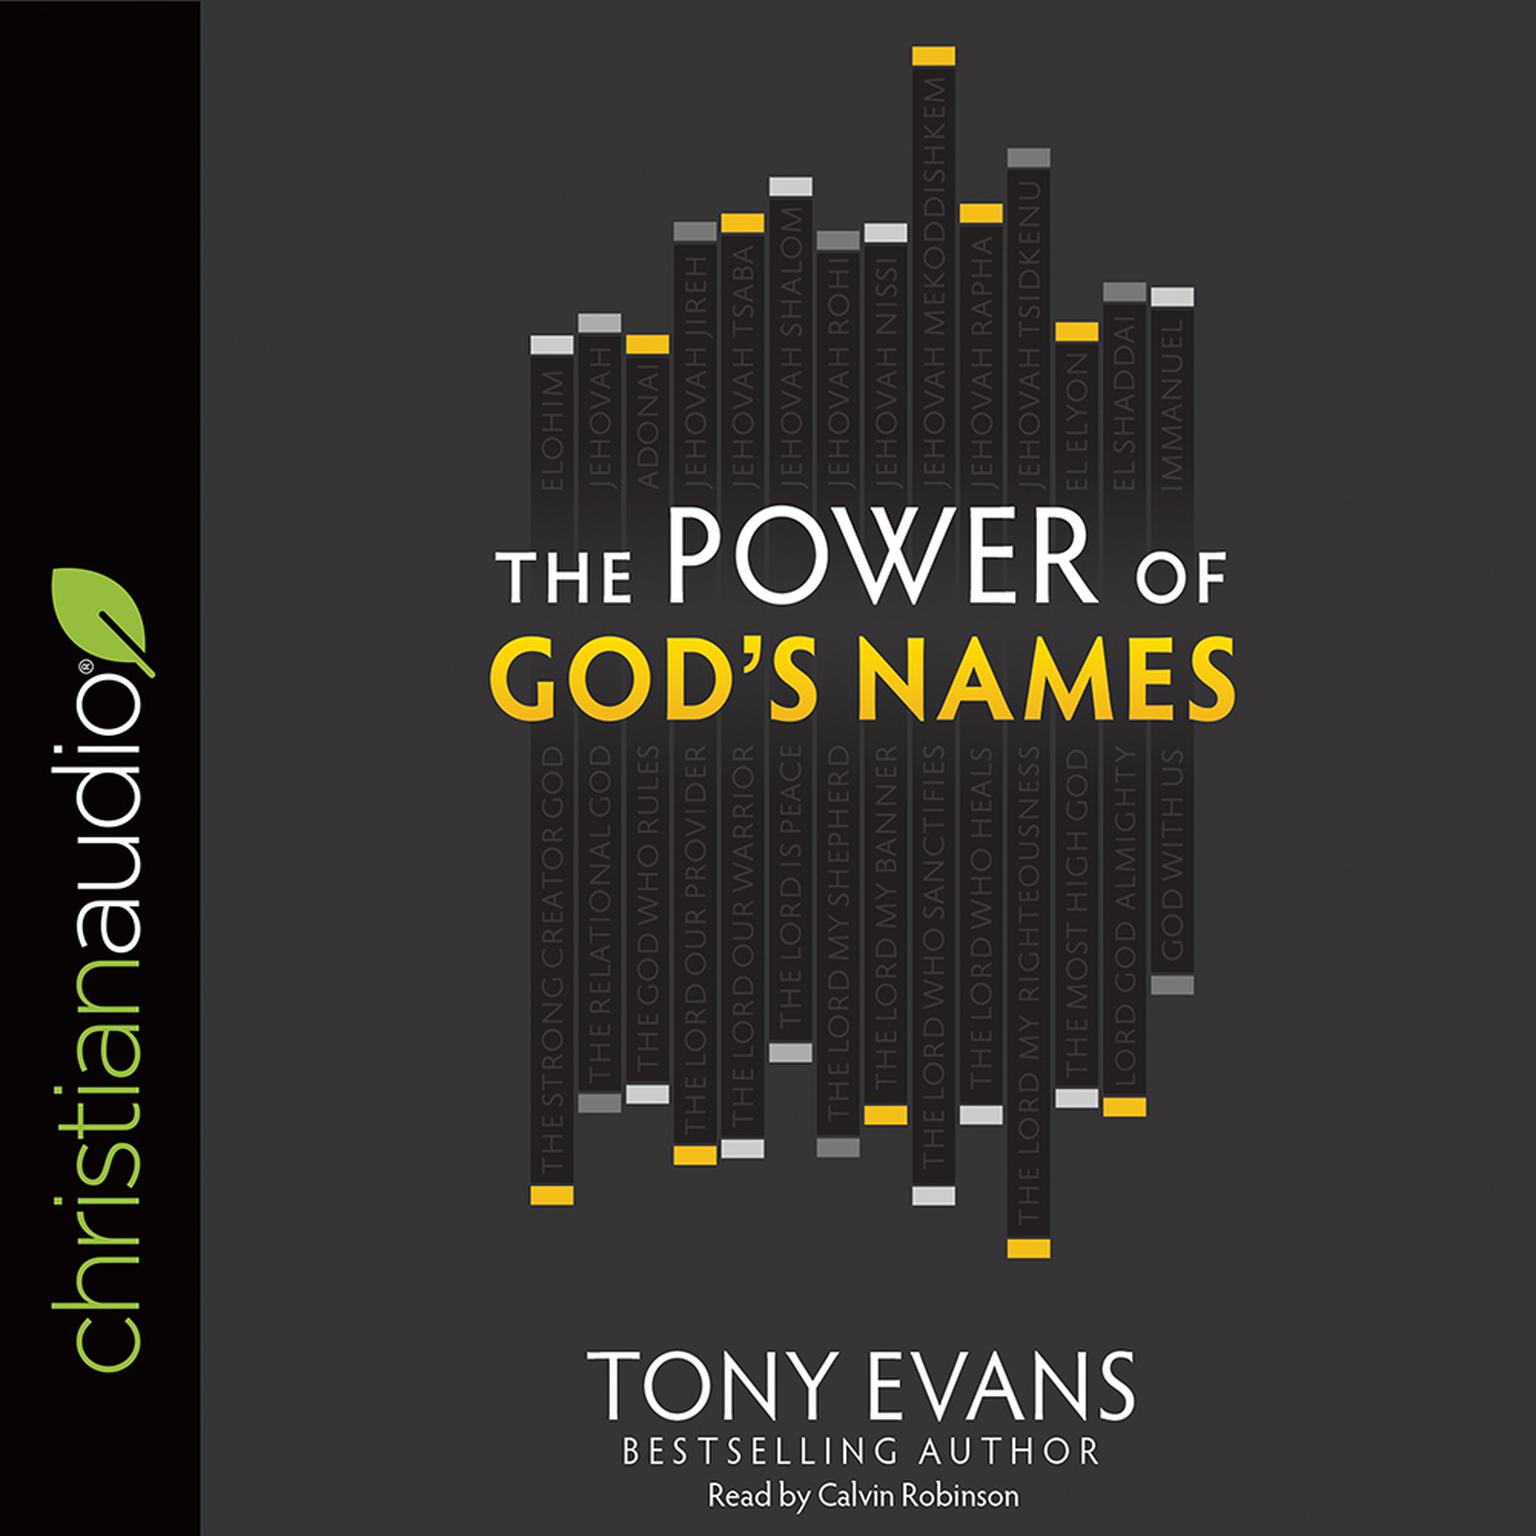 Power of Gods Names Audiobook, by Tony Evans